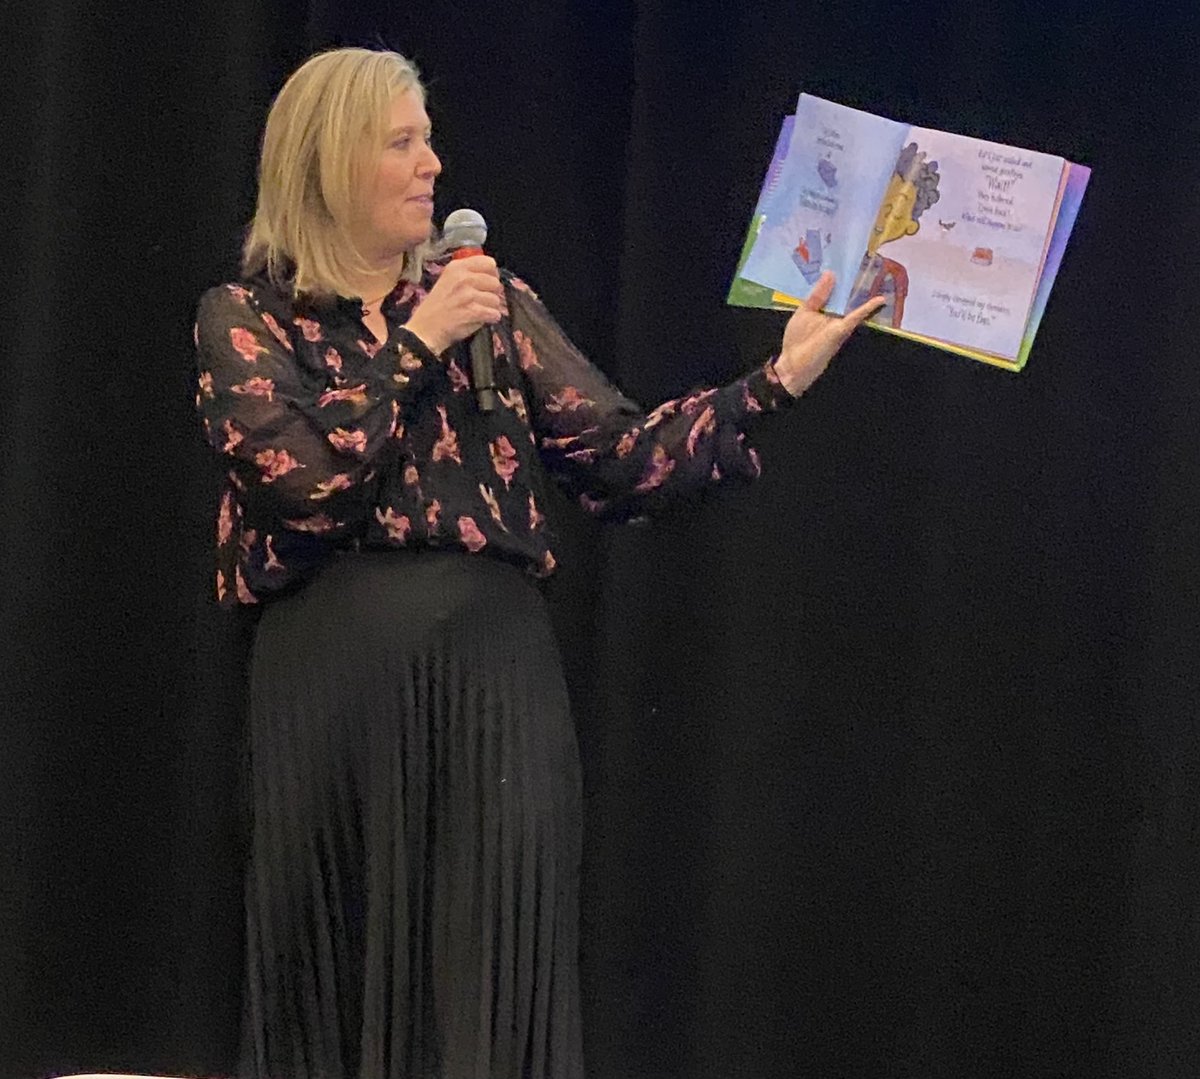 Even leaders love to have someone read to them! Thank you Kim from Scholastic! #BASAWomensConference